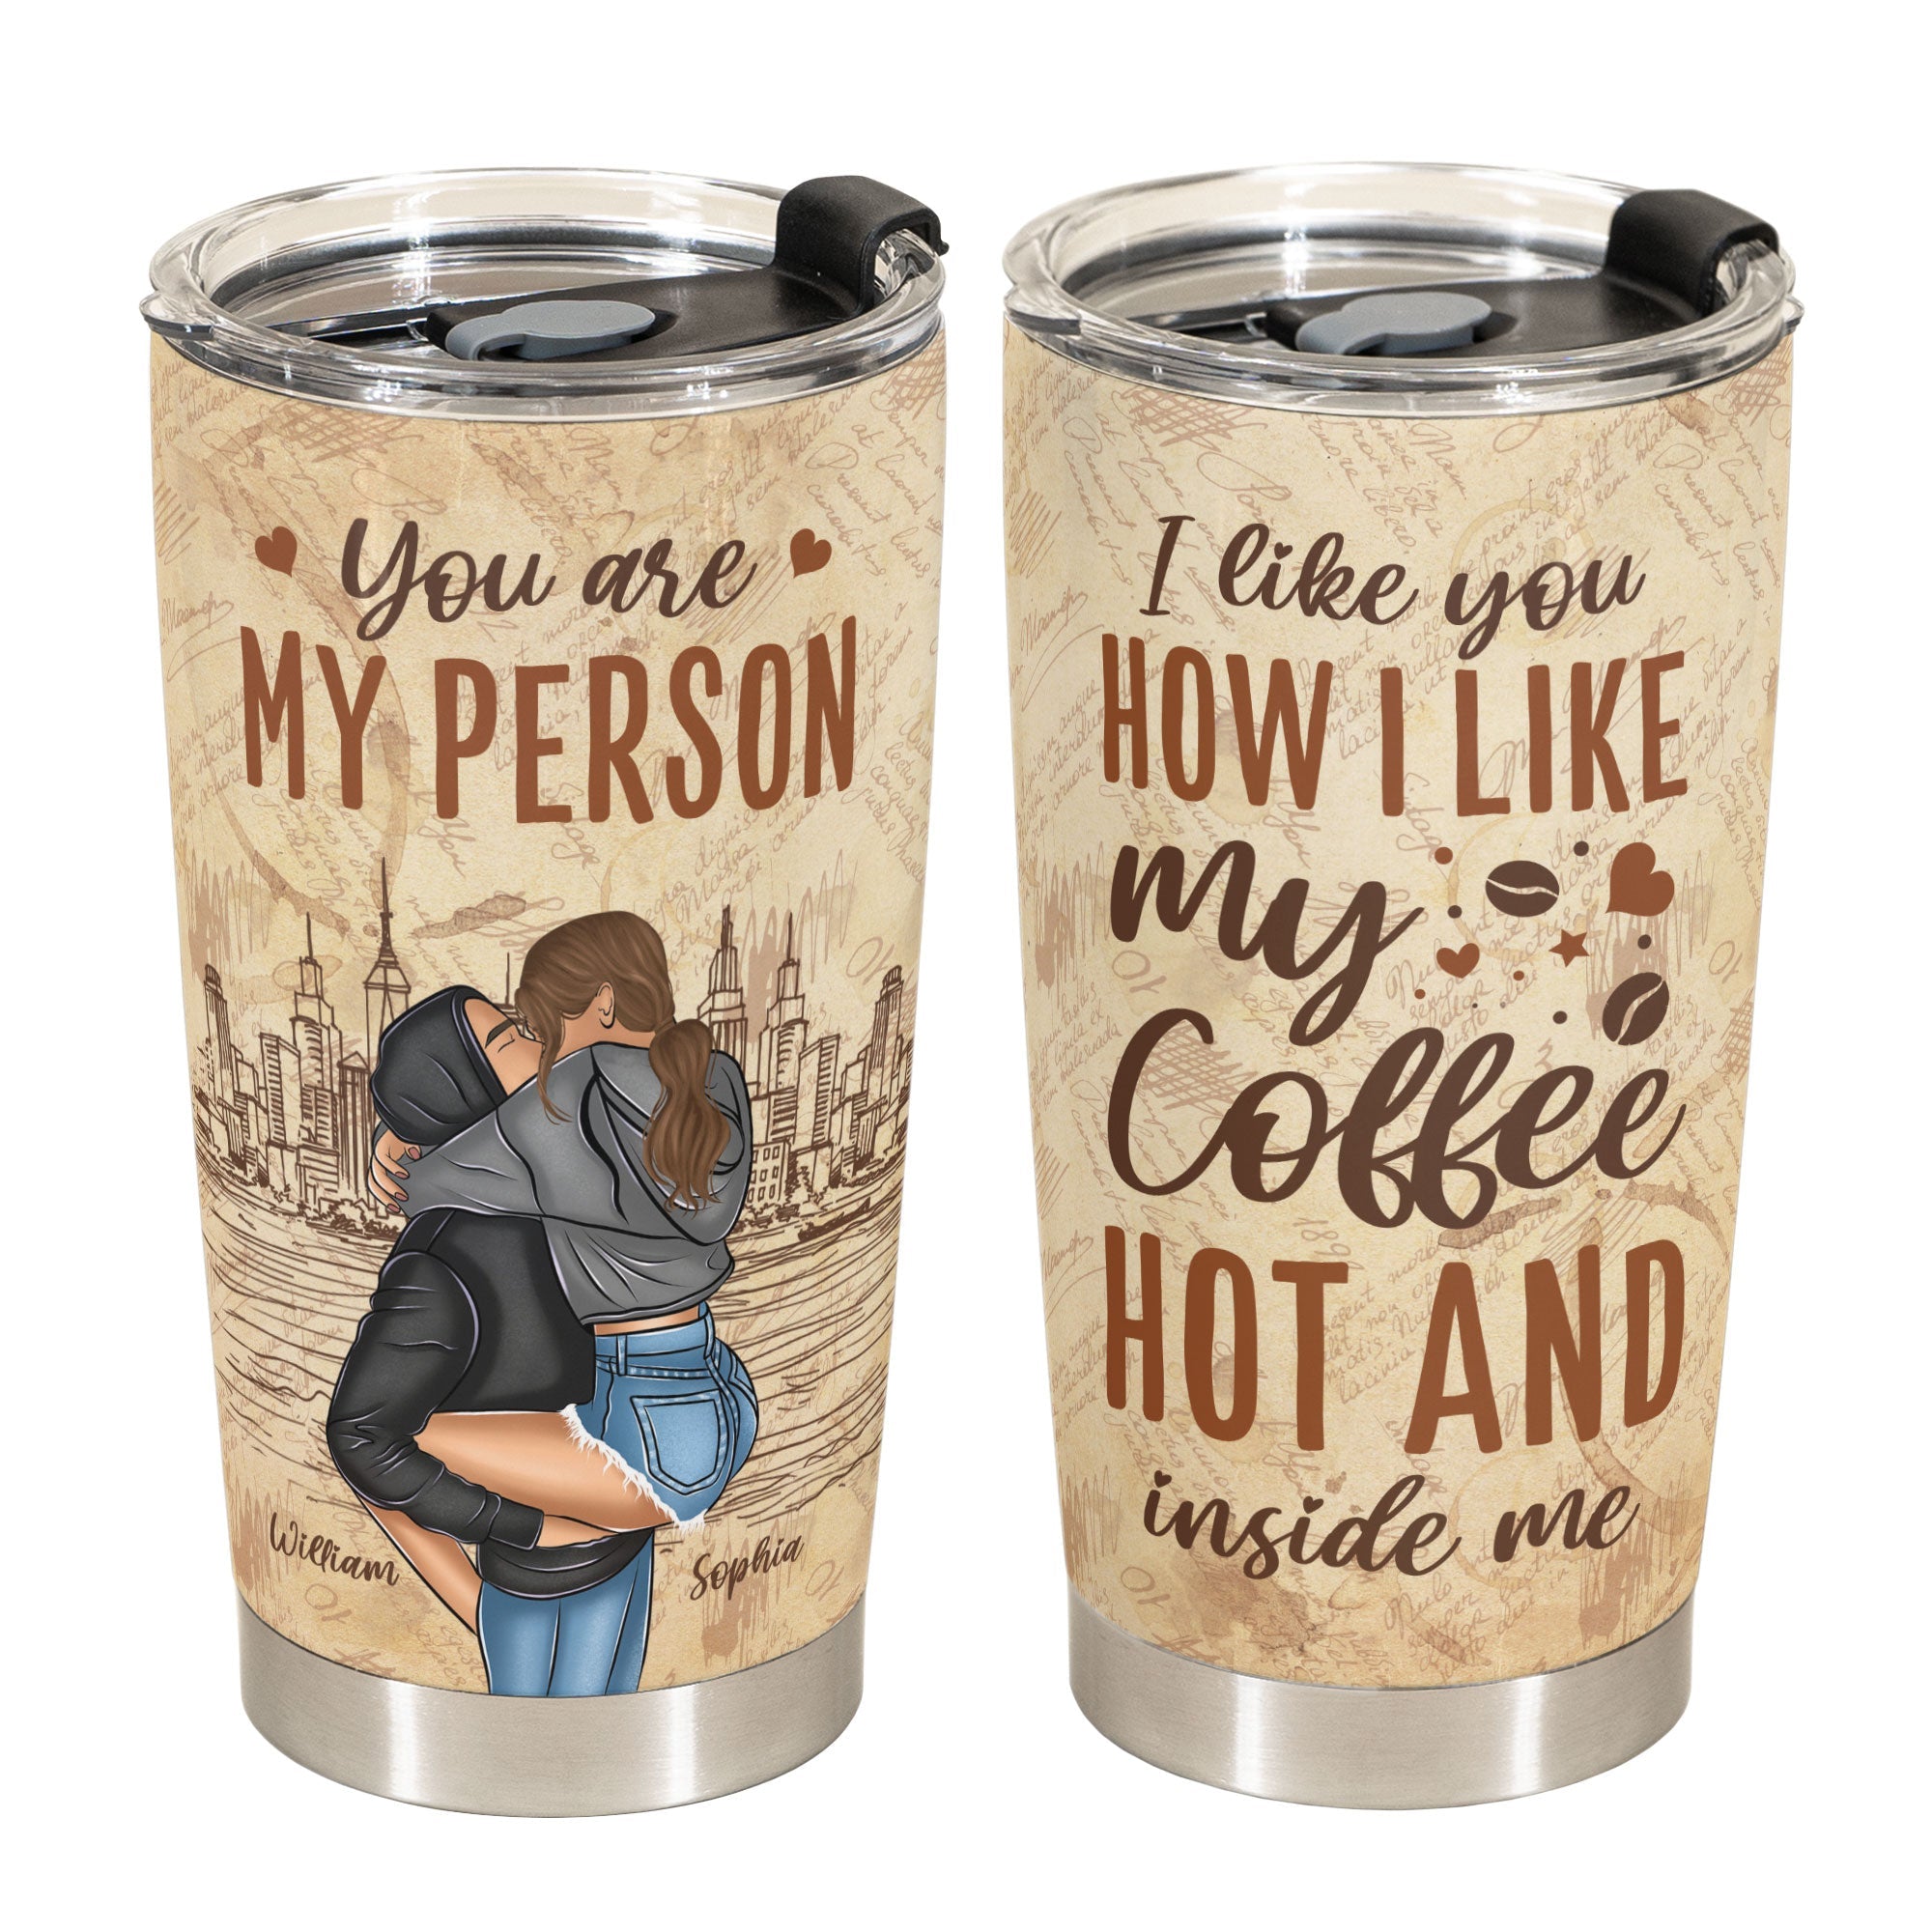 25 Easy Yet Practical Gifts For Brothers Girlfriend Ideas | Gifts for  brother, Gifts, Practical gifts